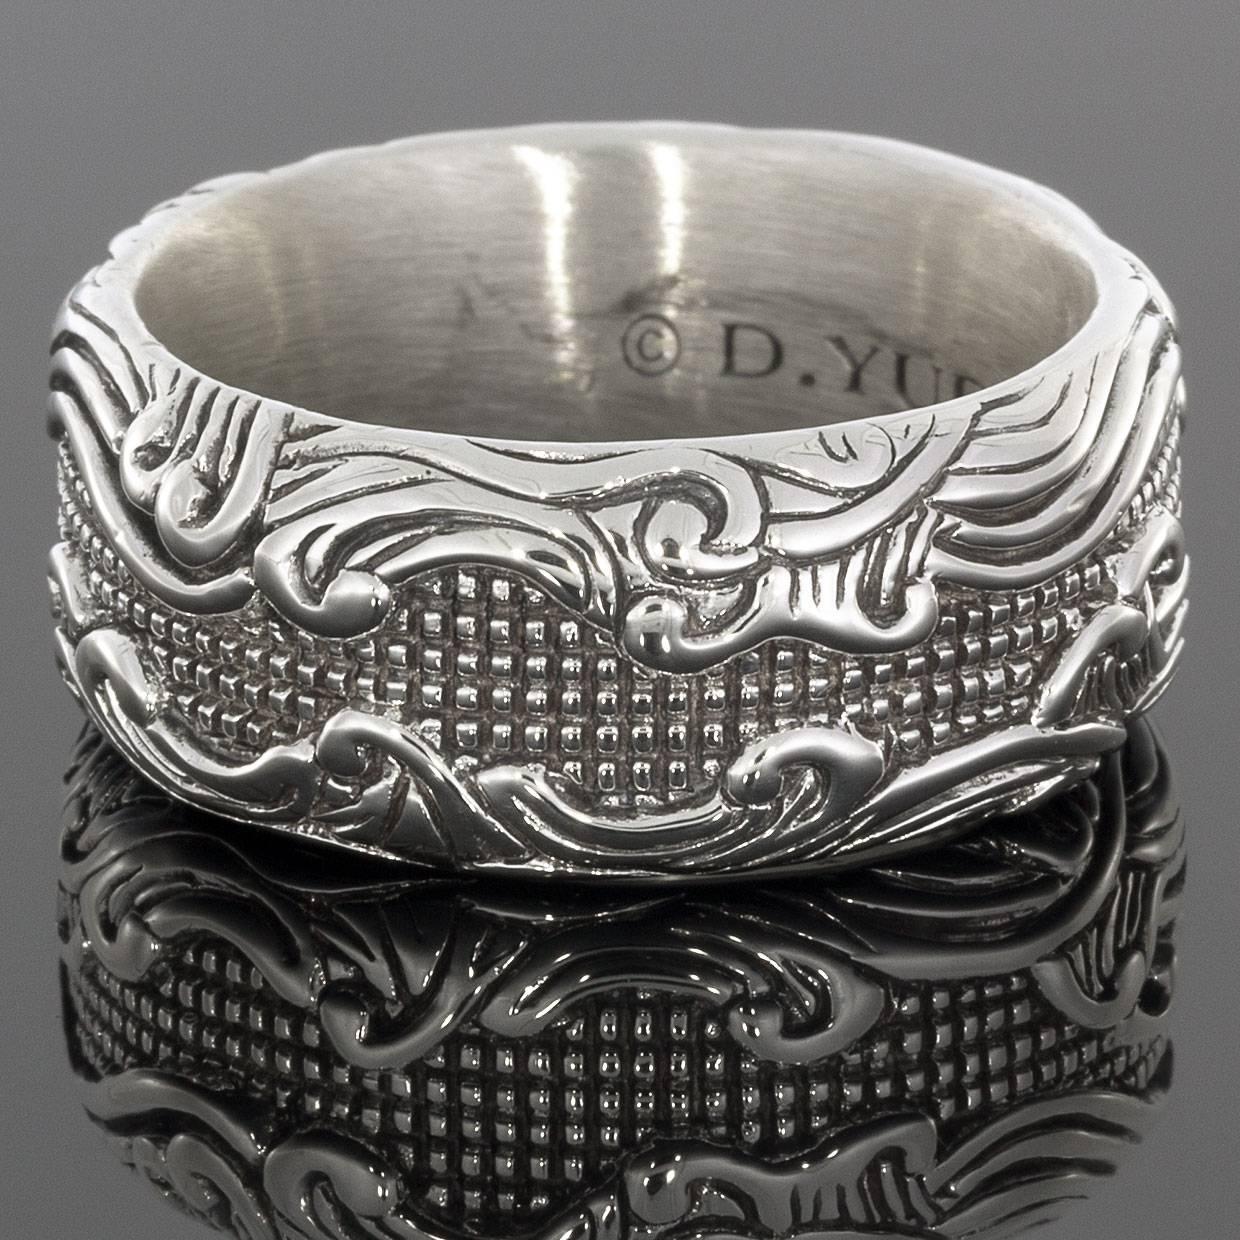 David Yurman's cable style jewelry has become his signature, the unifying element of every collection. This timeless David Yurman men's ring is from the Waves Collection & features Yurman's intricate sterling silver designs. The ring measures 10